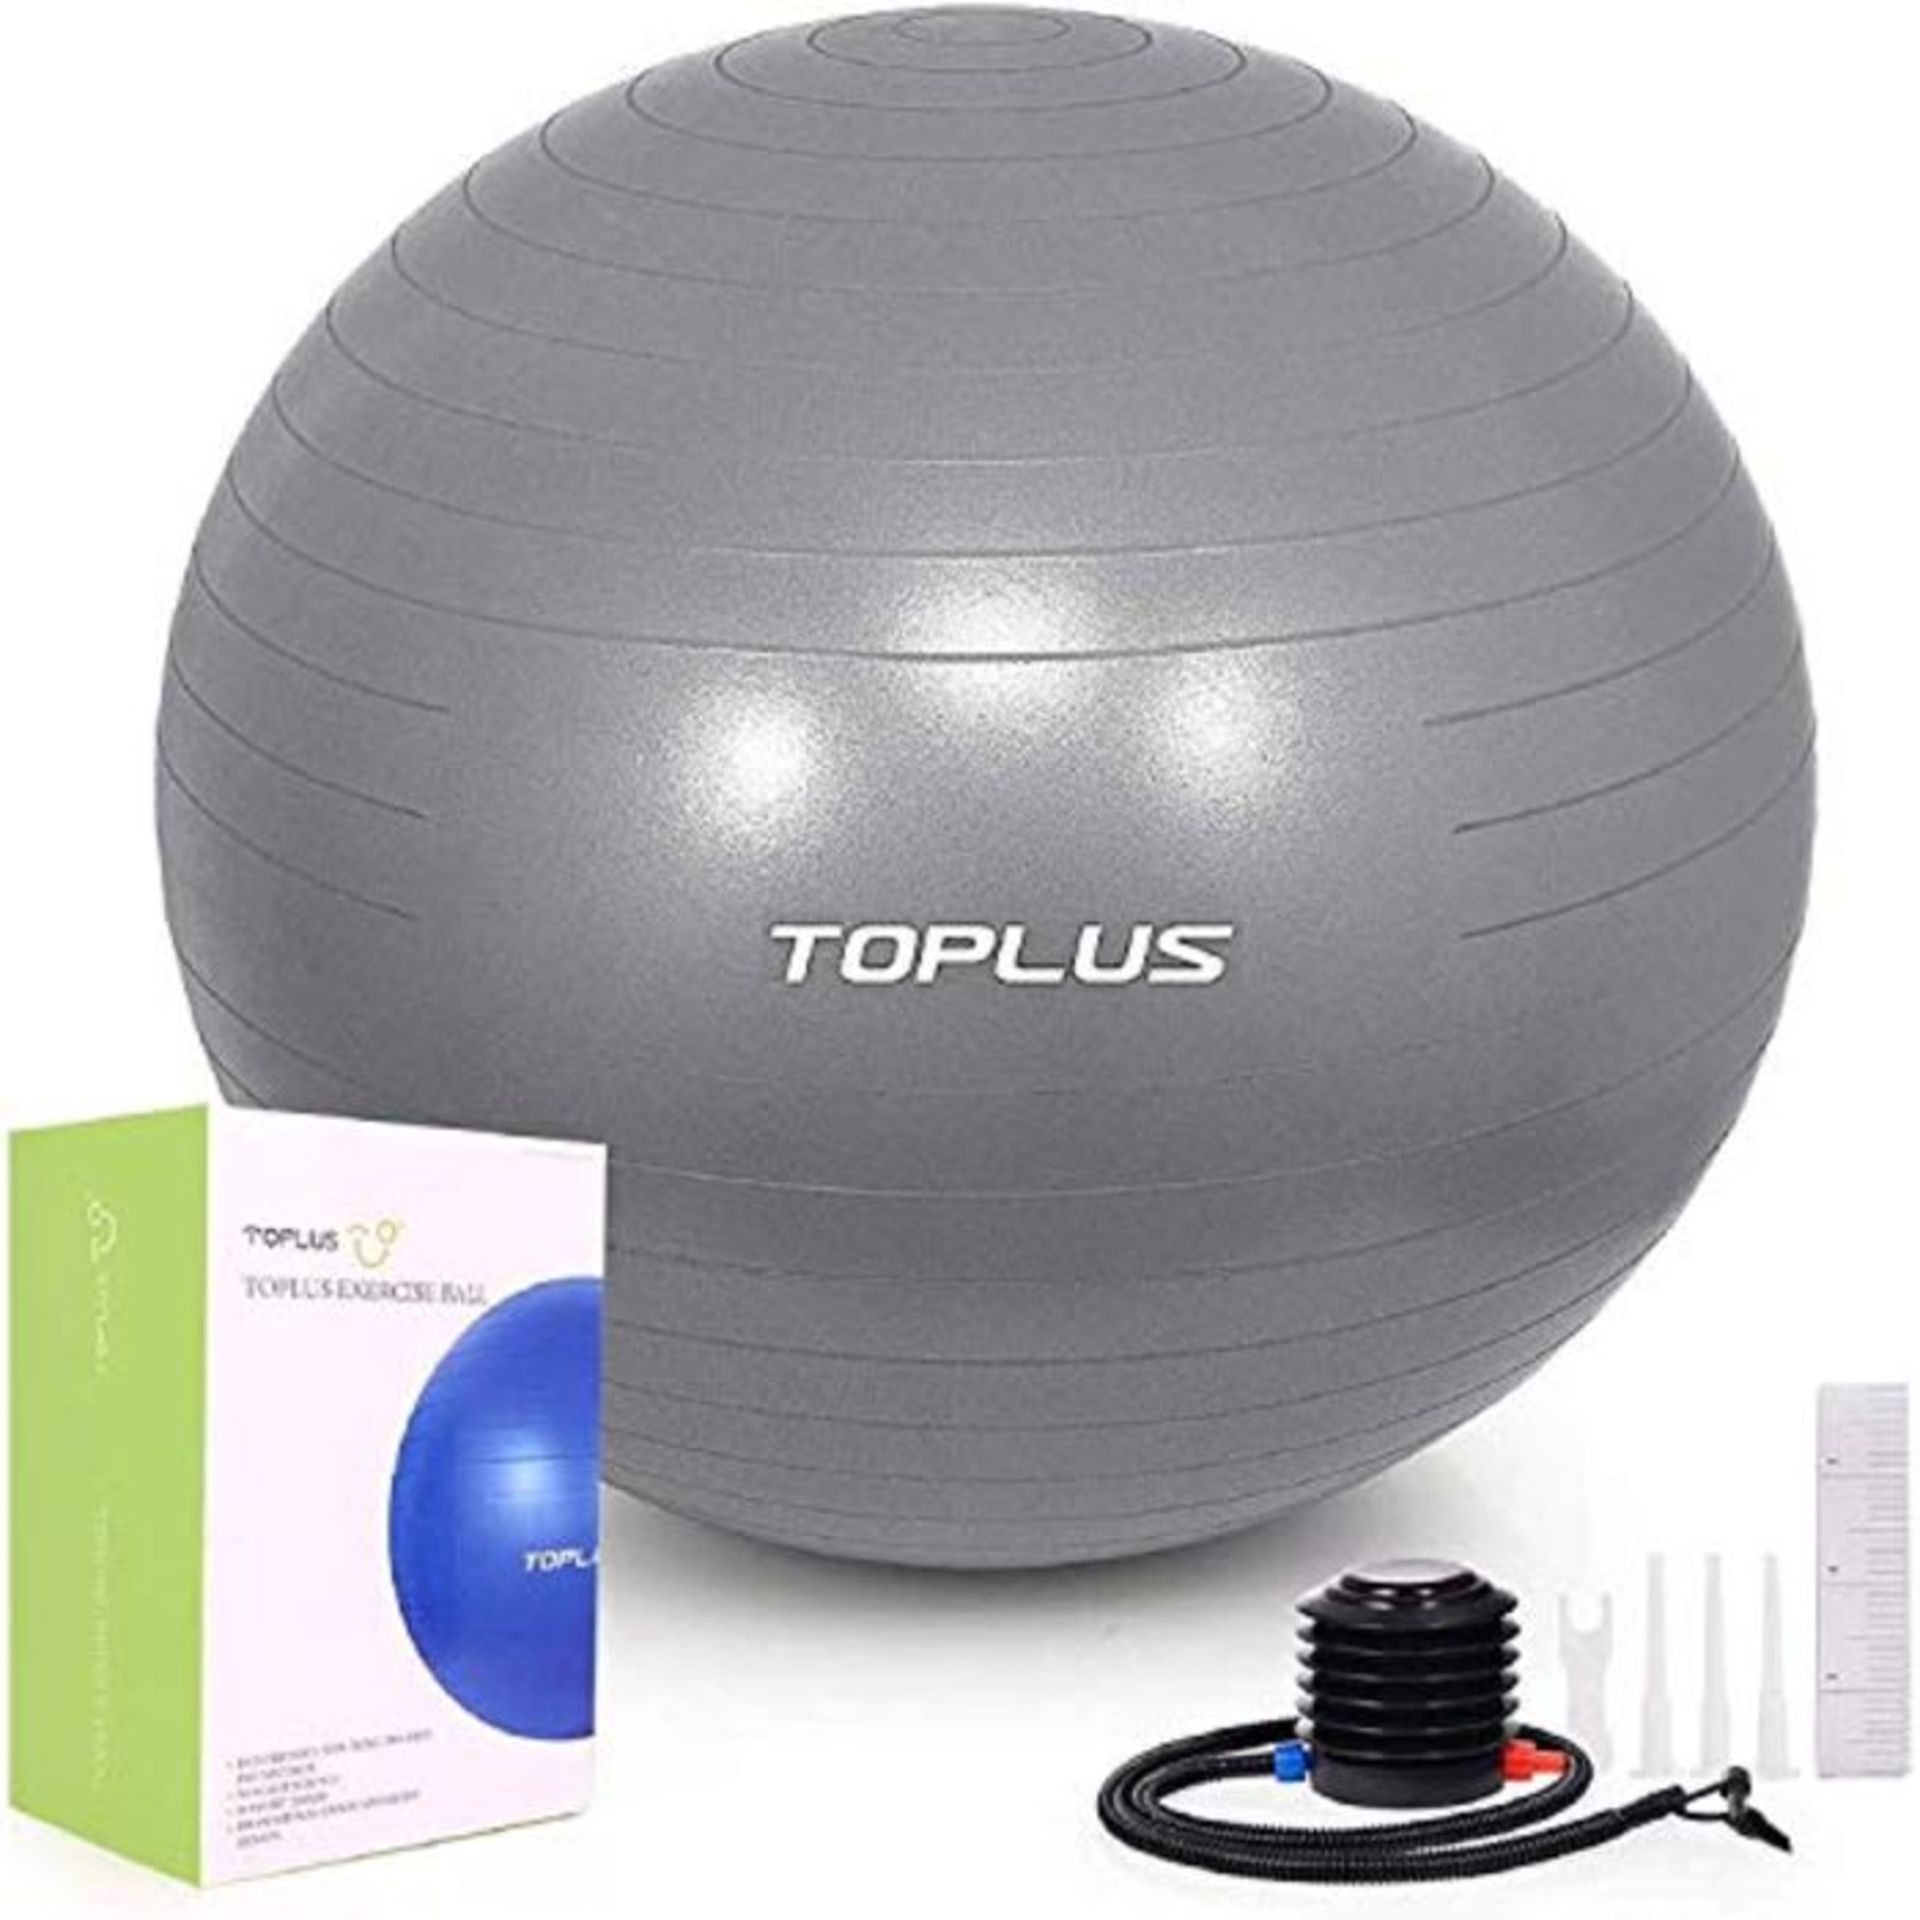 TOPLUS Exercise Ball Extra Thick Yoga Ball Chair, Anti-Berst Stability Ball for Heavy - Image 3 of 4